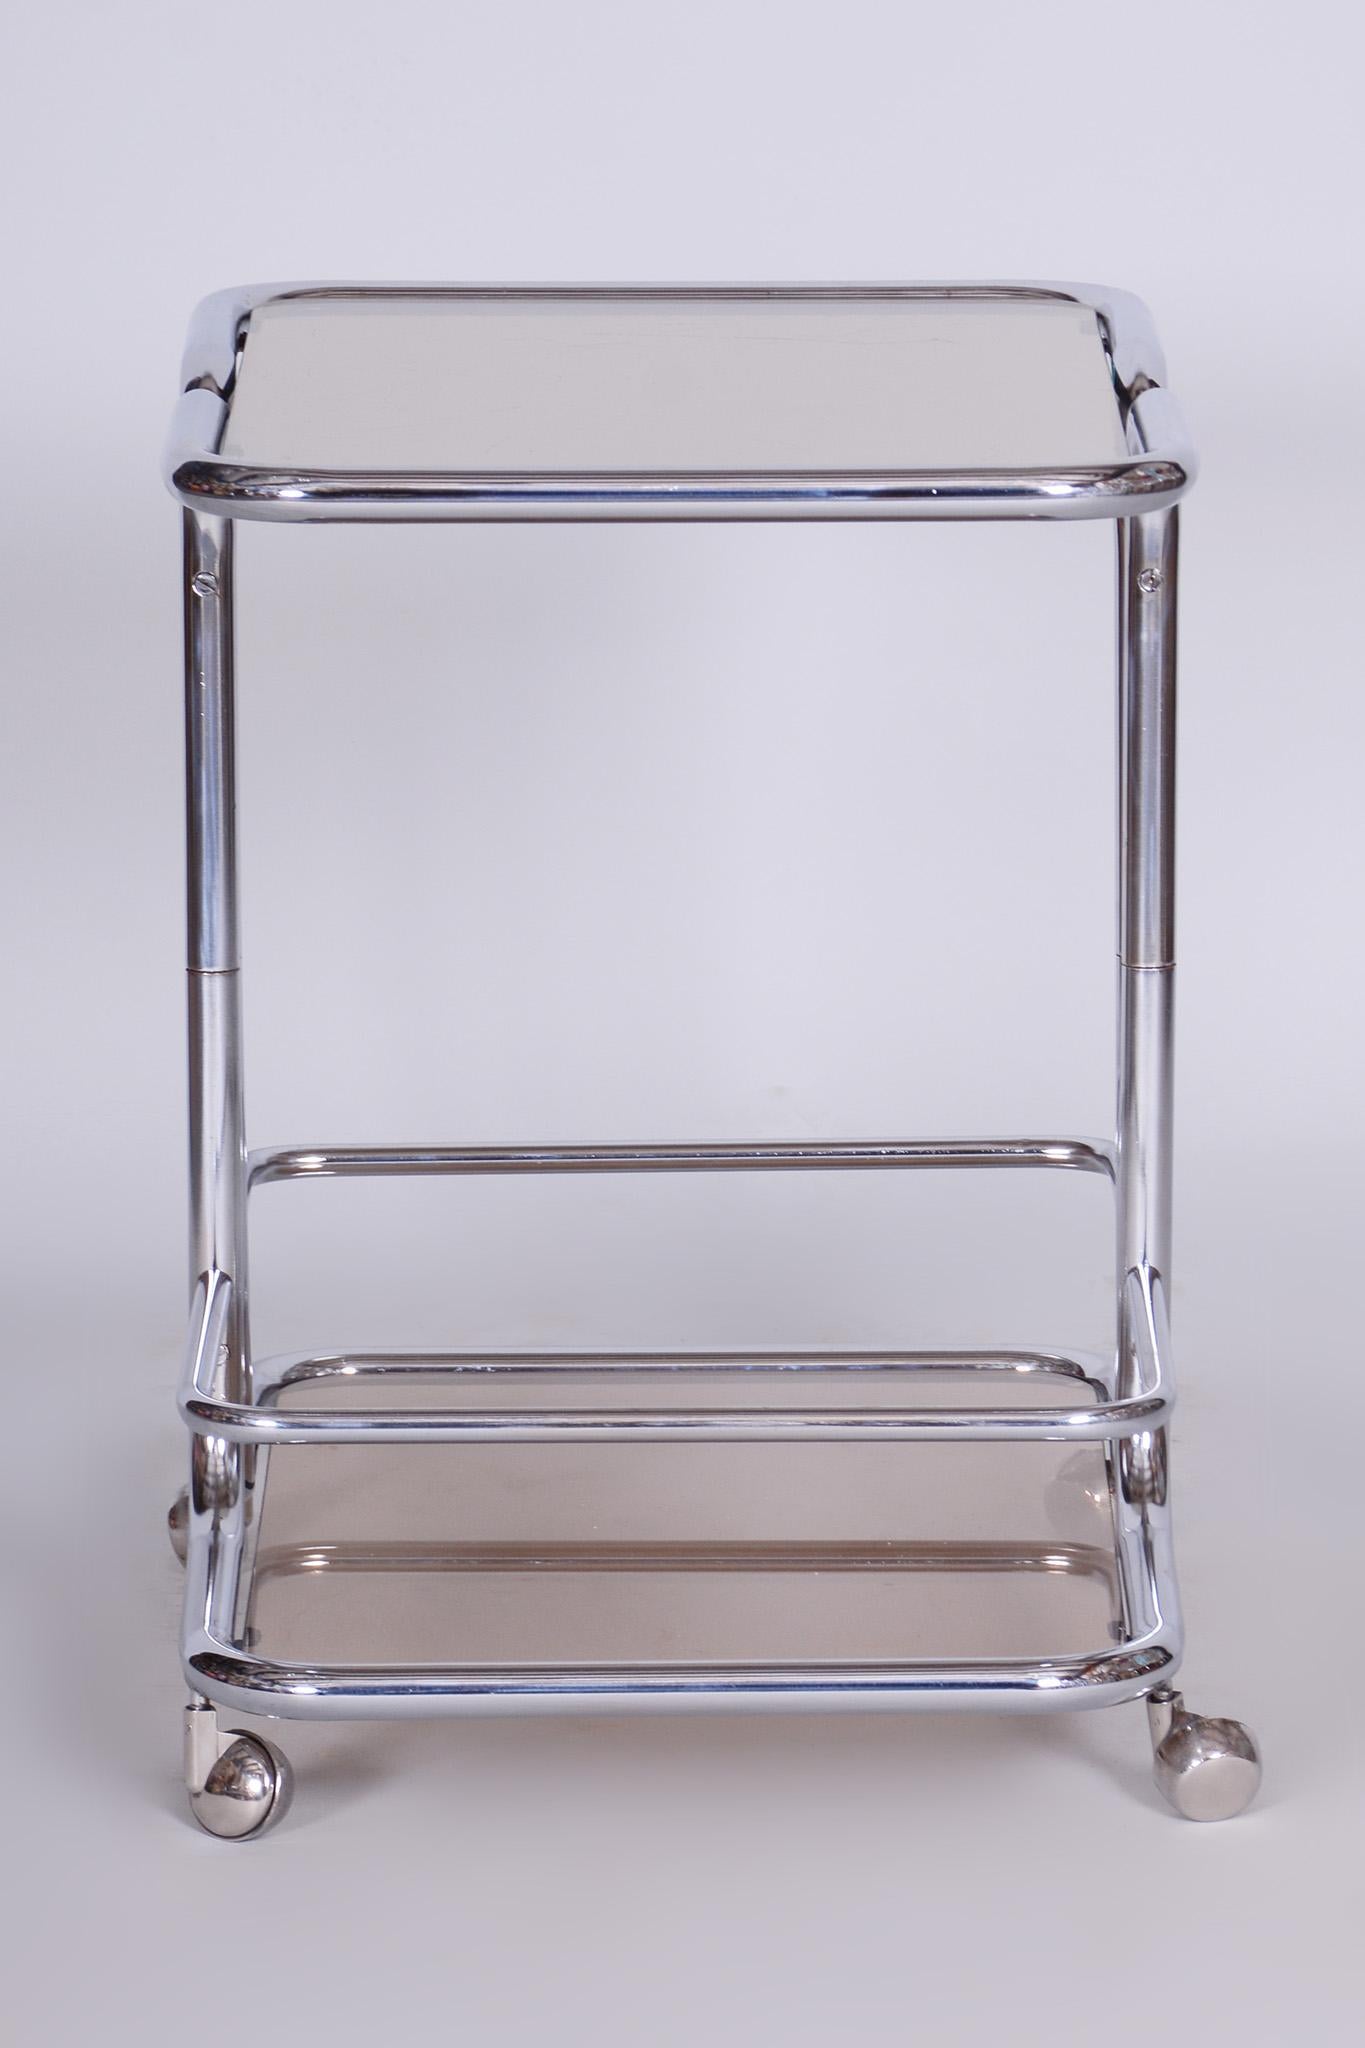 Steel Original Midcentury Chrome Serving Trolley, Smoked Glass, 1960s, Czechia For Sale